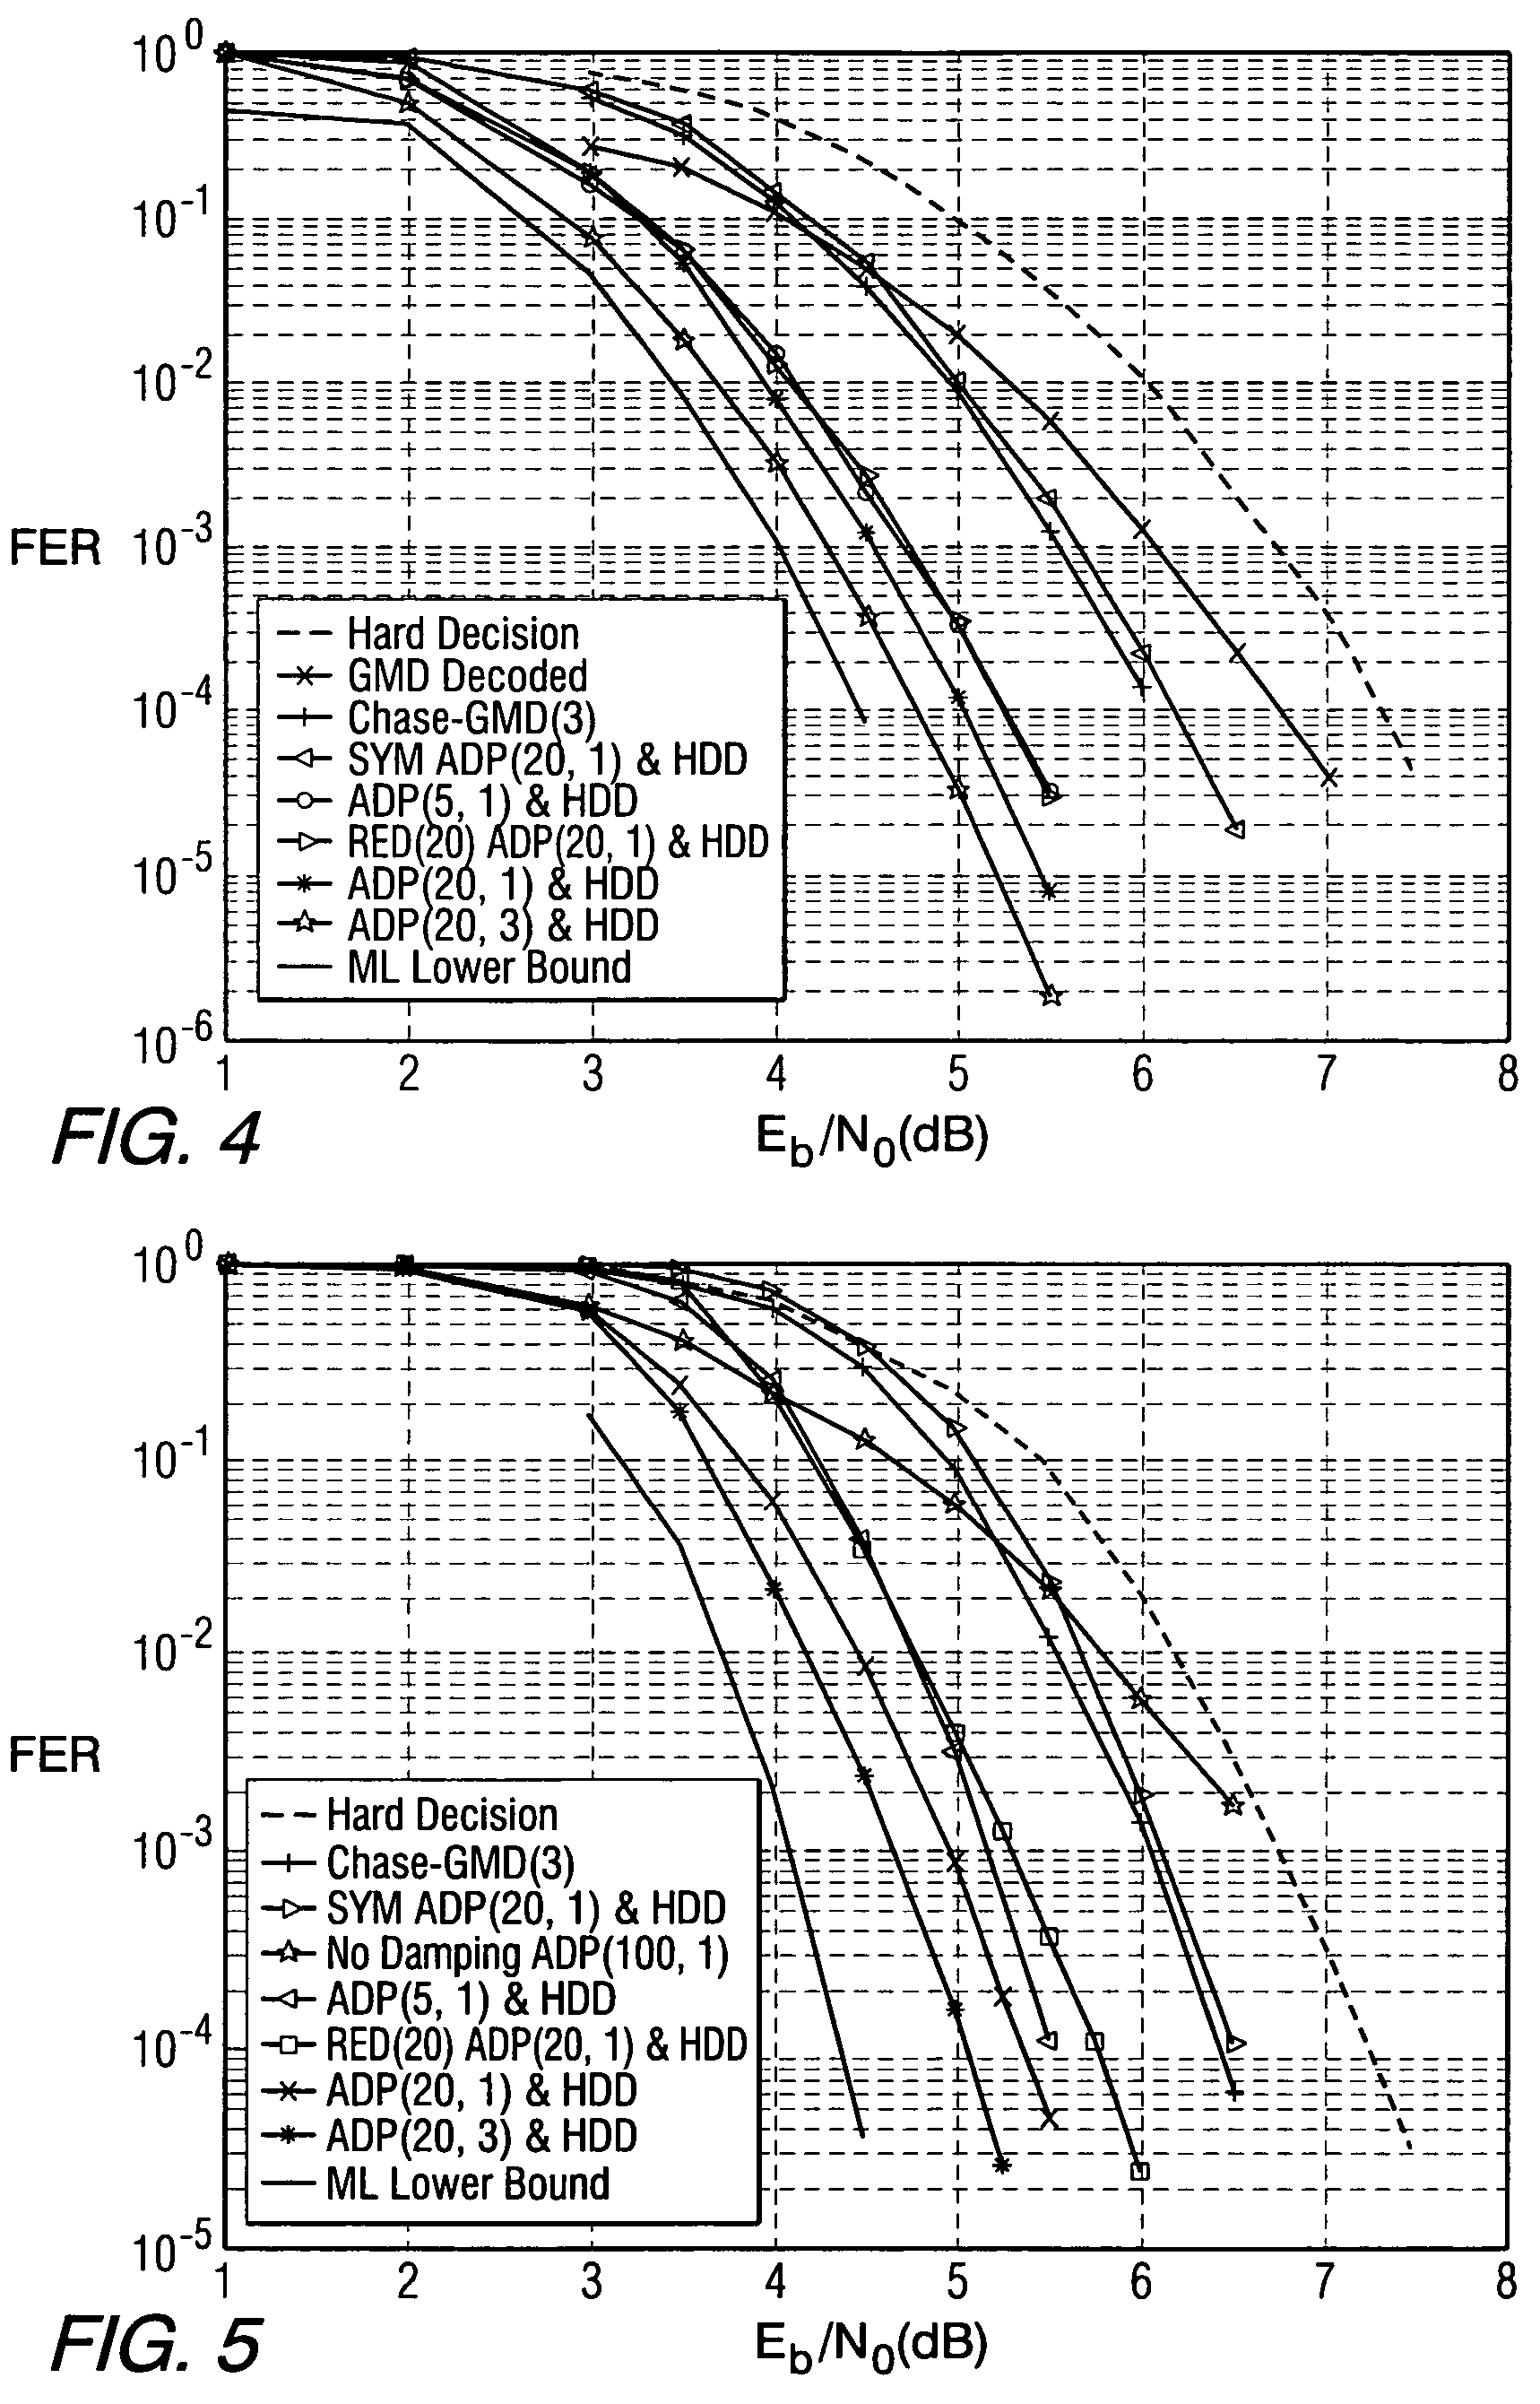 Iterative decoding of linear block codes by adapting the parity check matrix